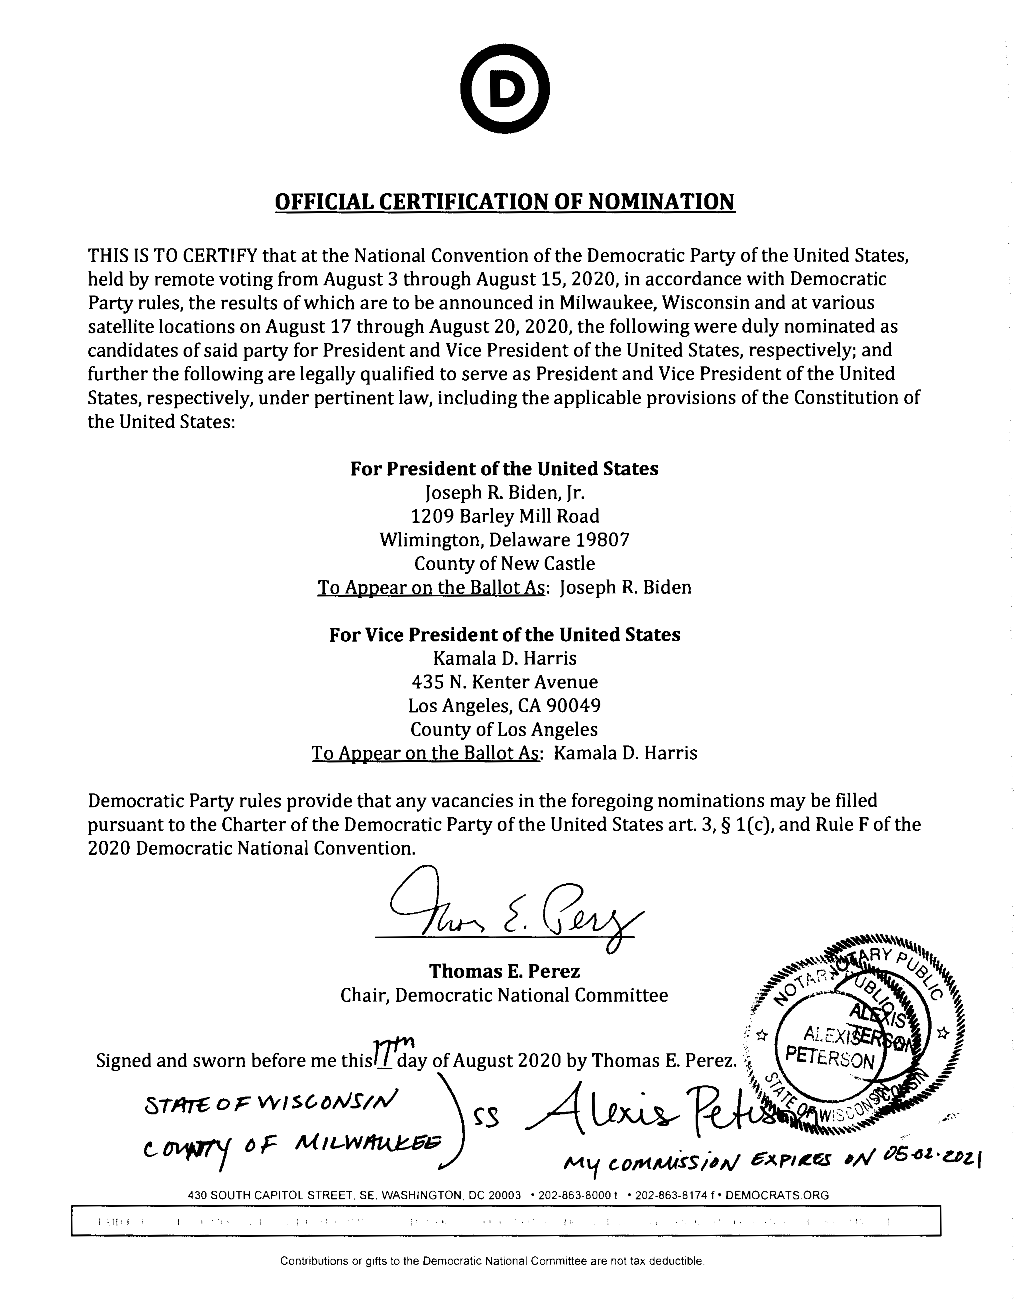 Official Certification of Nomination